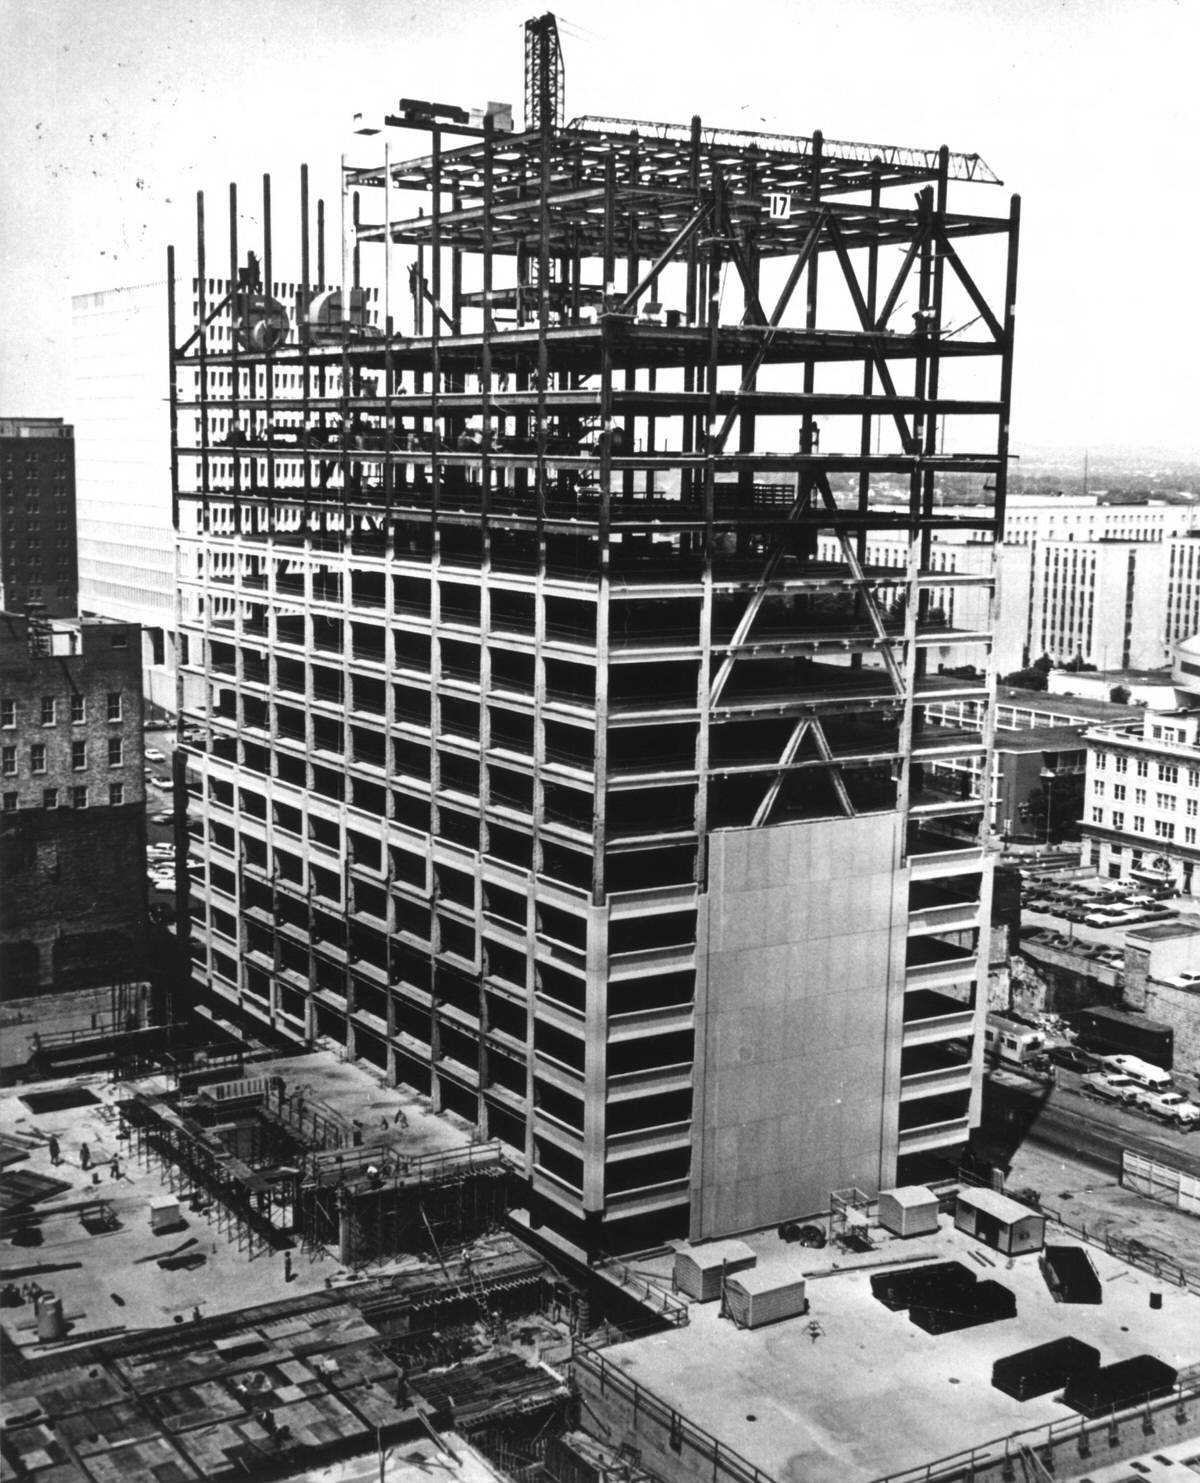 Construction of the new First American National Bank building in Nashville, Tennessee, 1972.